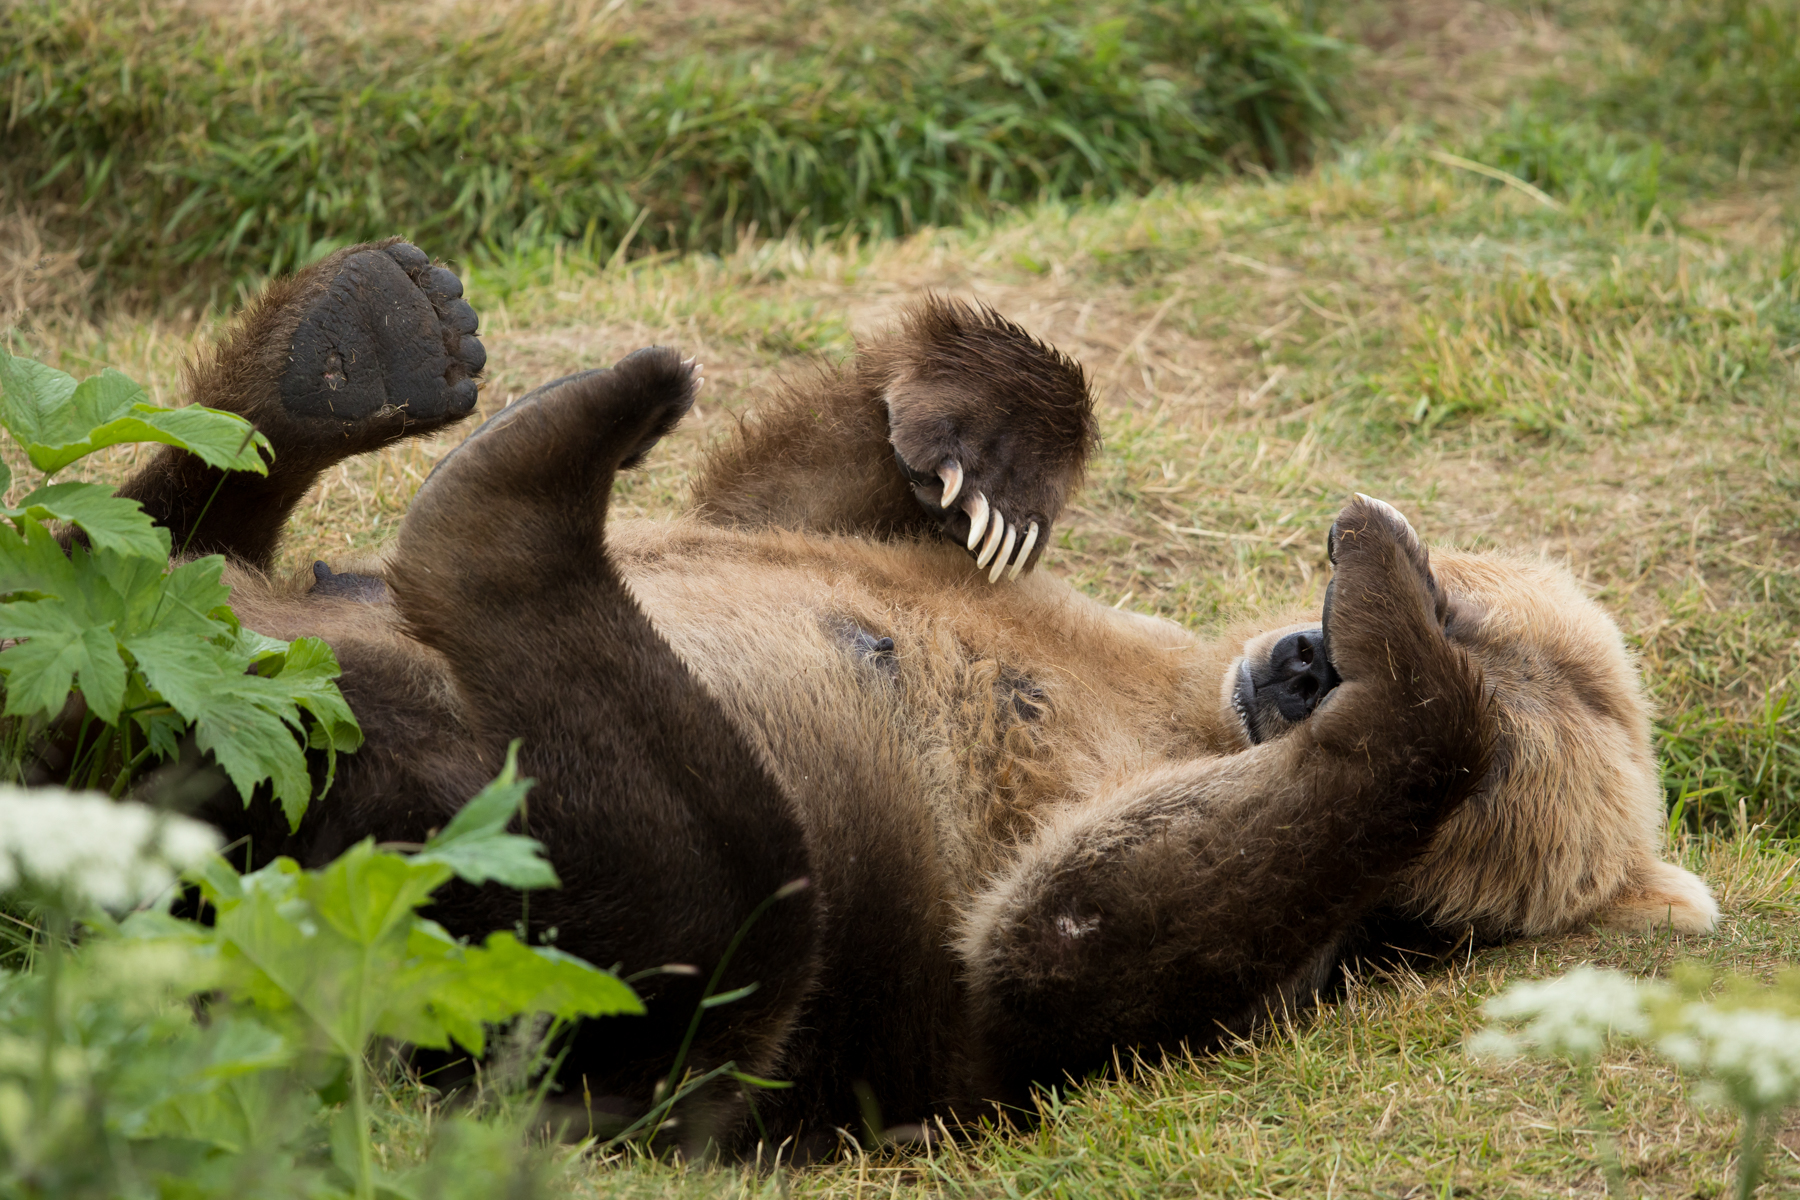 A brown bear female resting on her back with paws in the air and over her face.